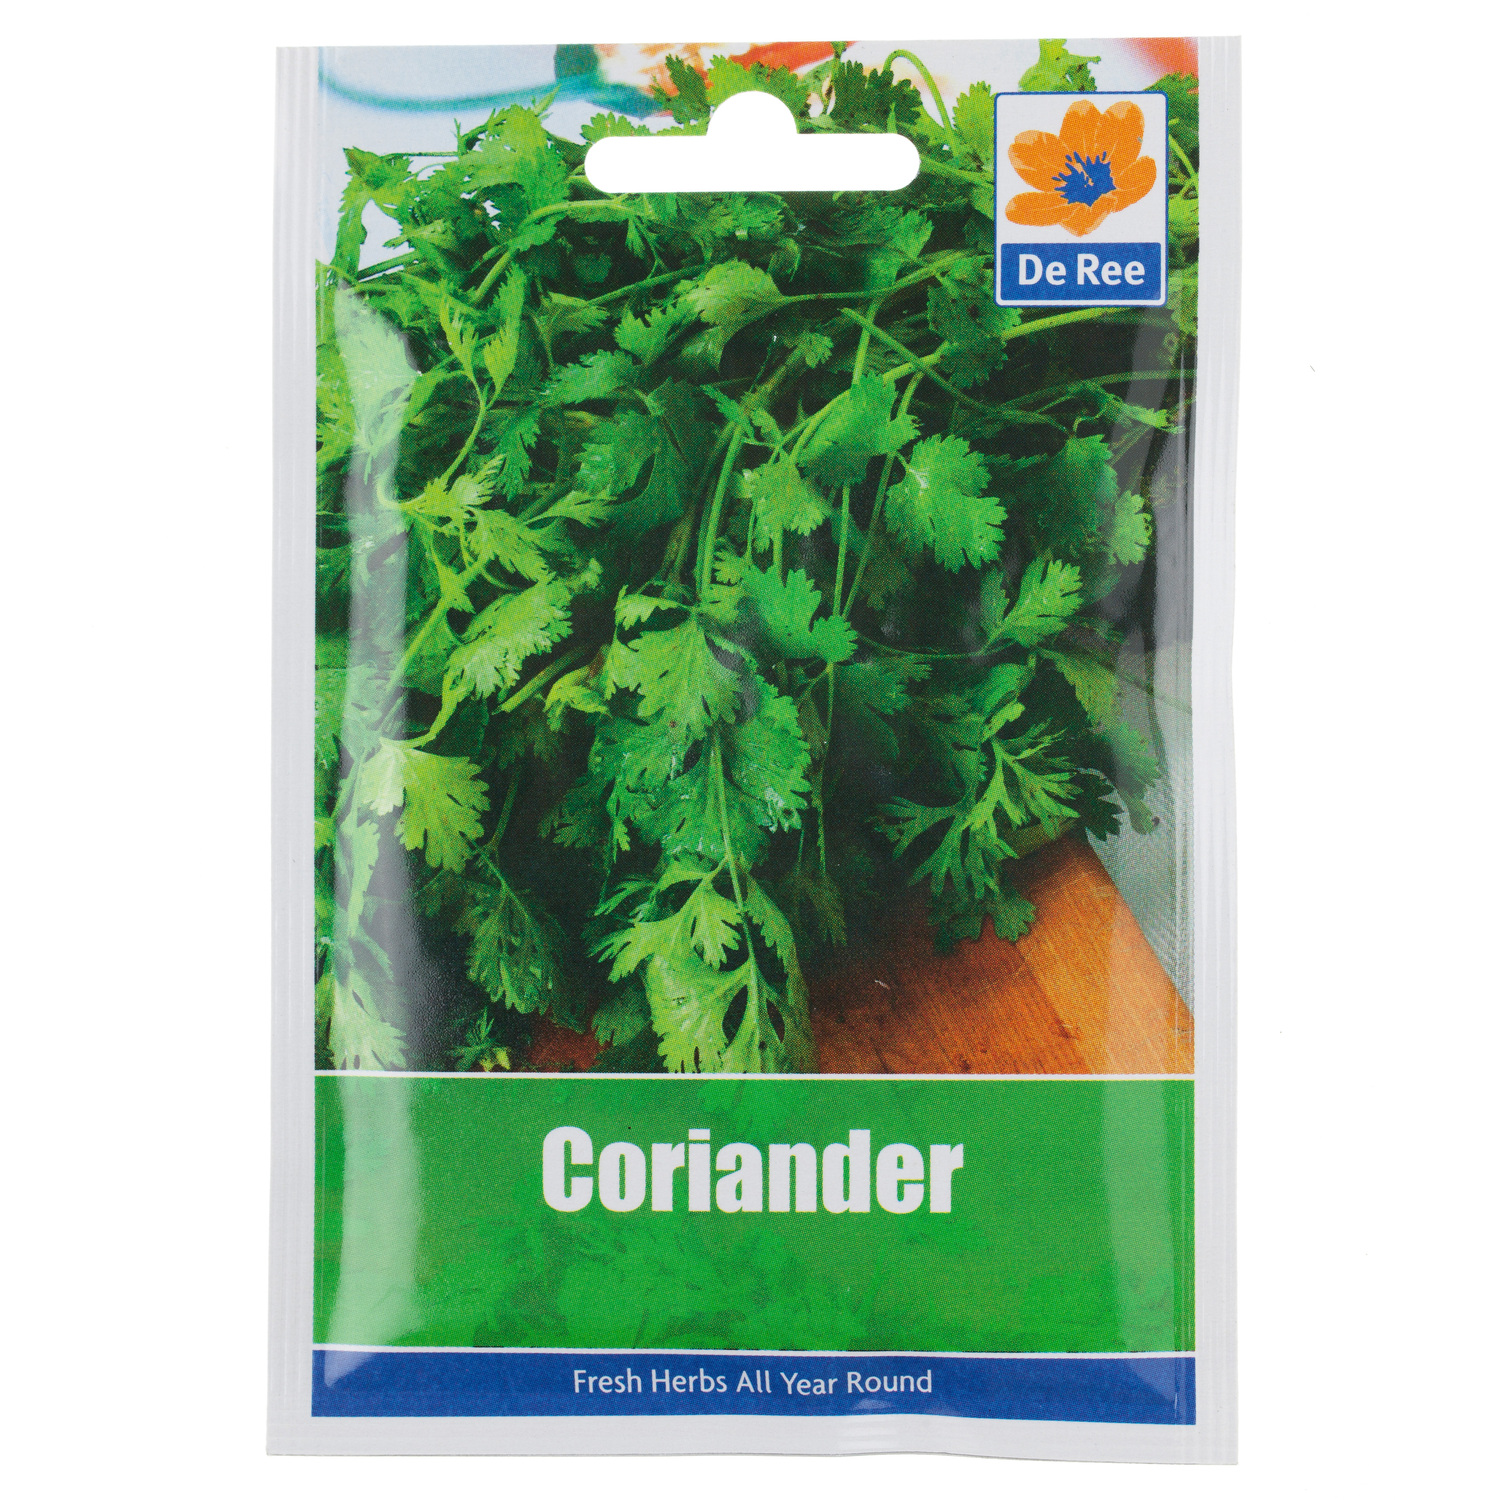 Coriander Seed Packet Image